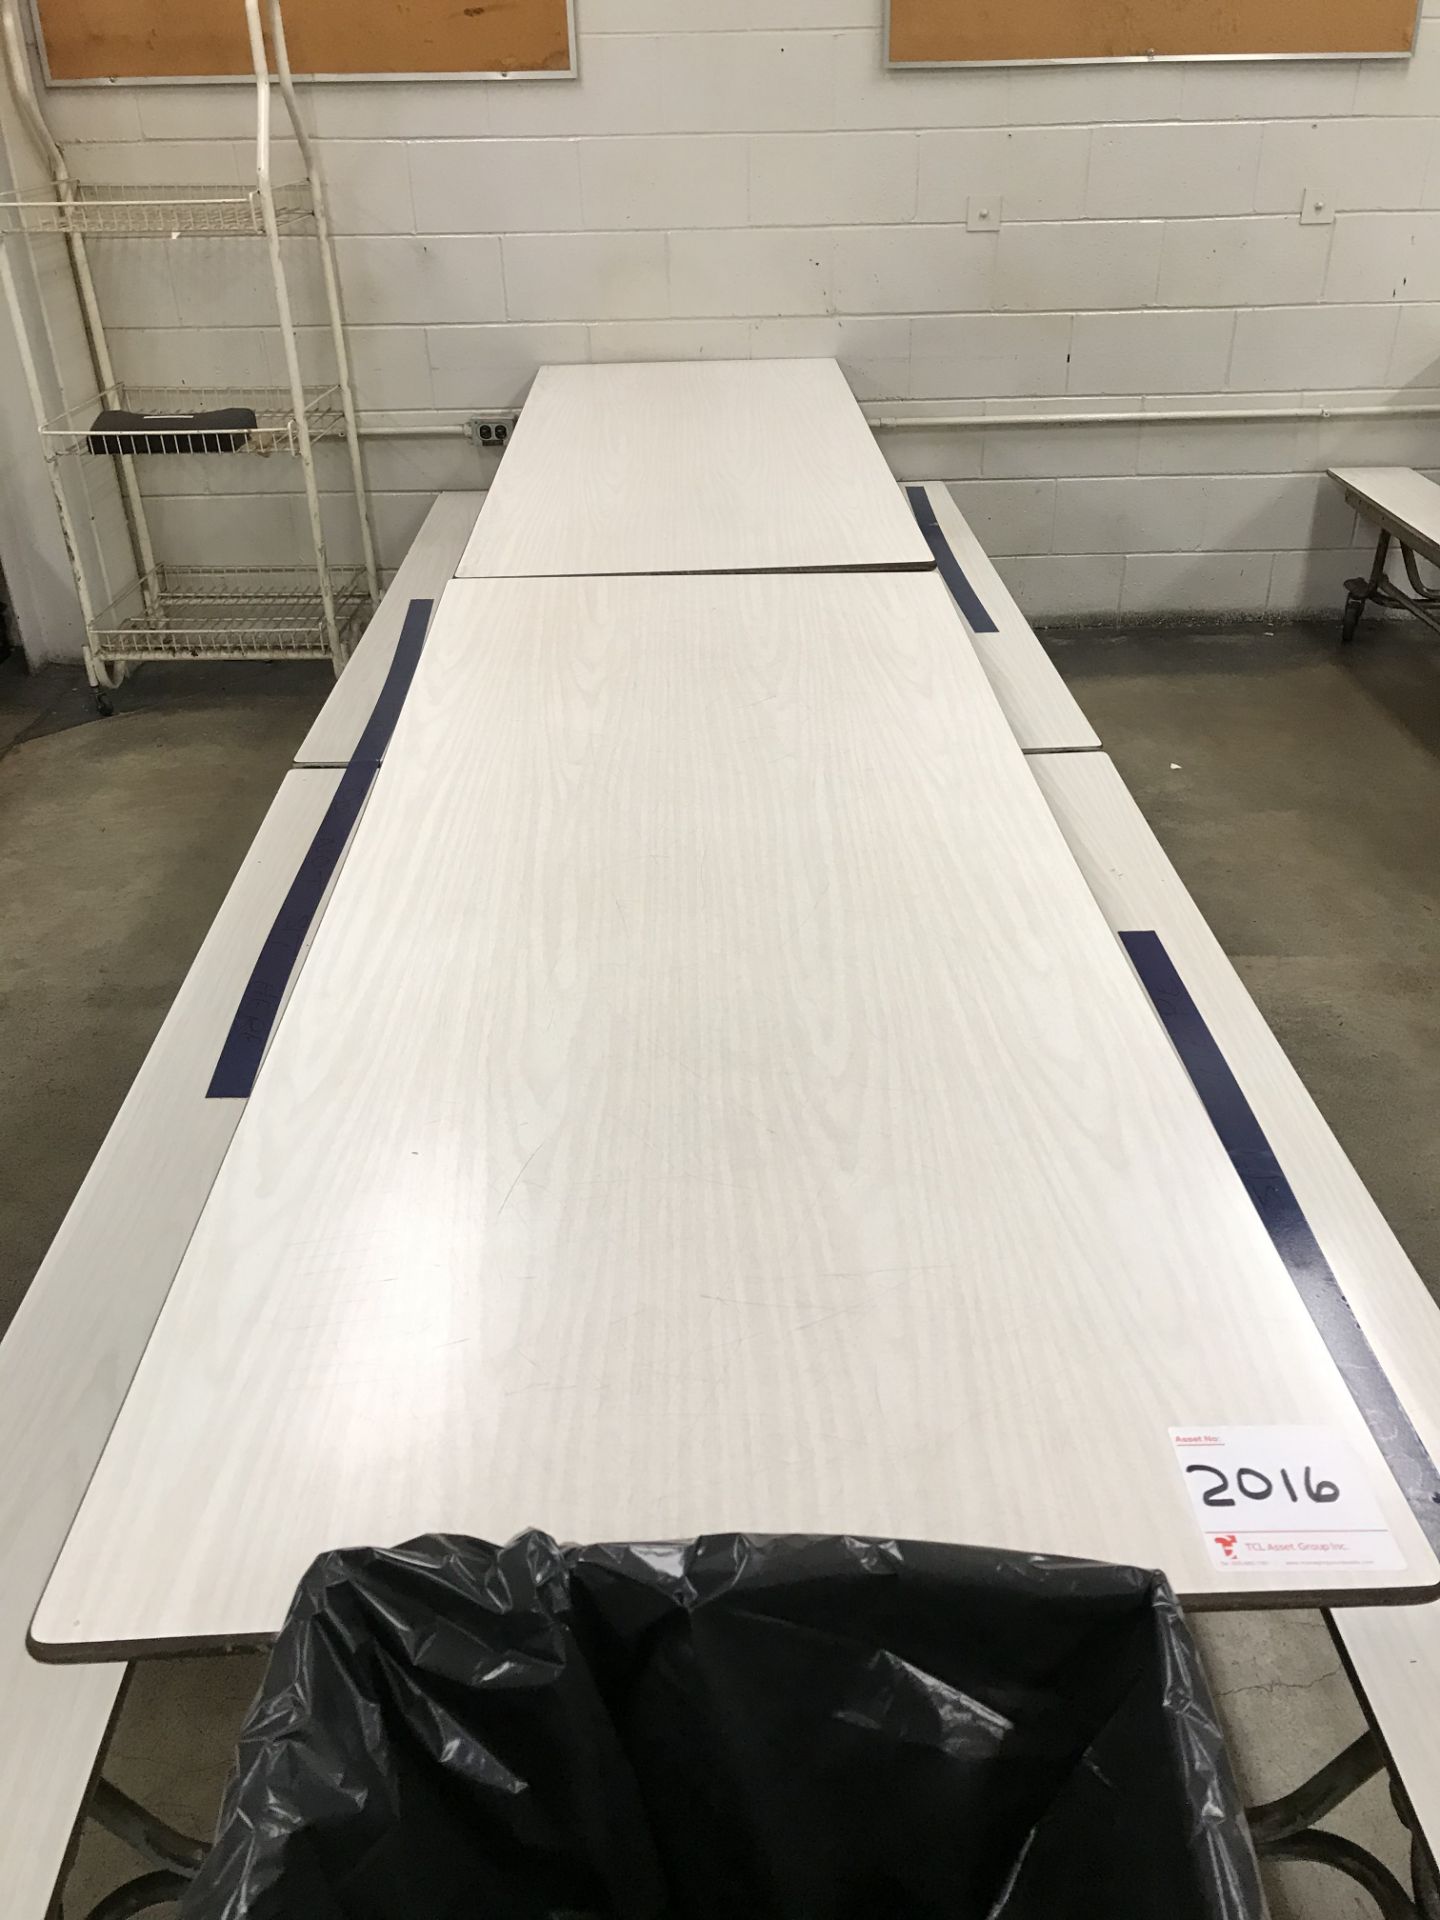 CAFETERIA TABLE & BENCH, Approx. 144 X 29 X 29 in.